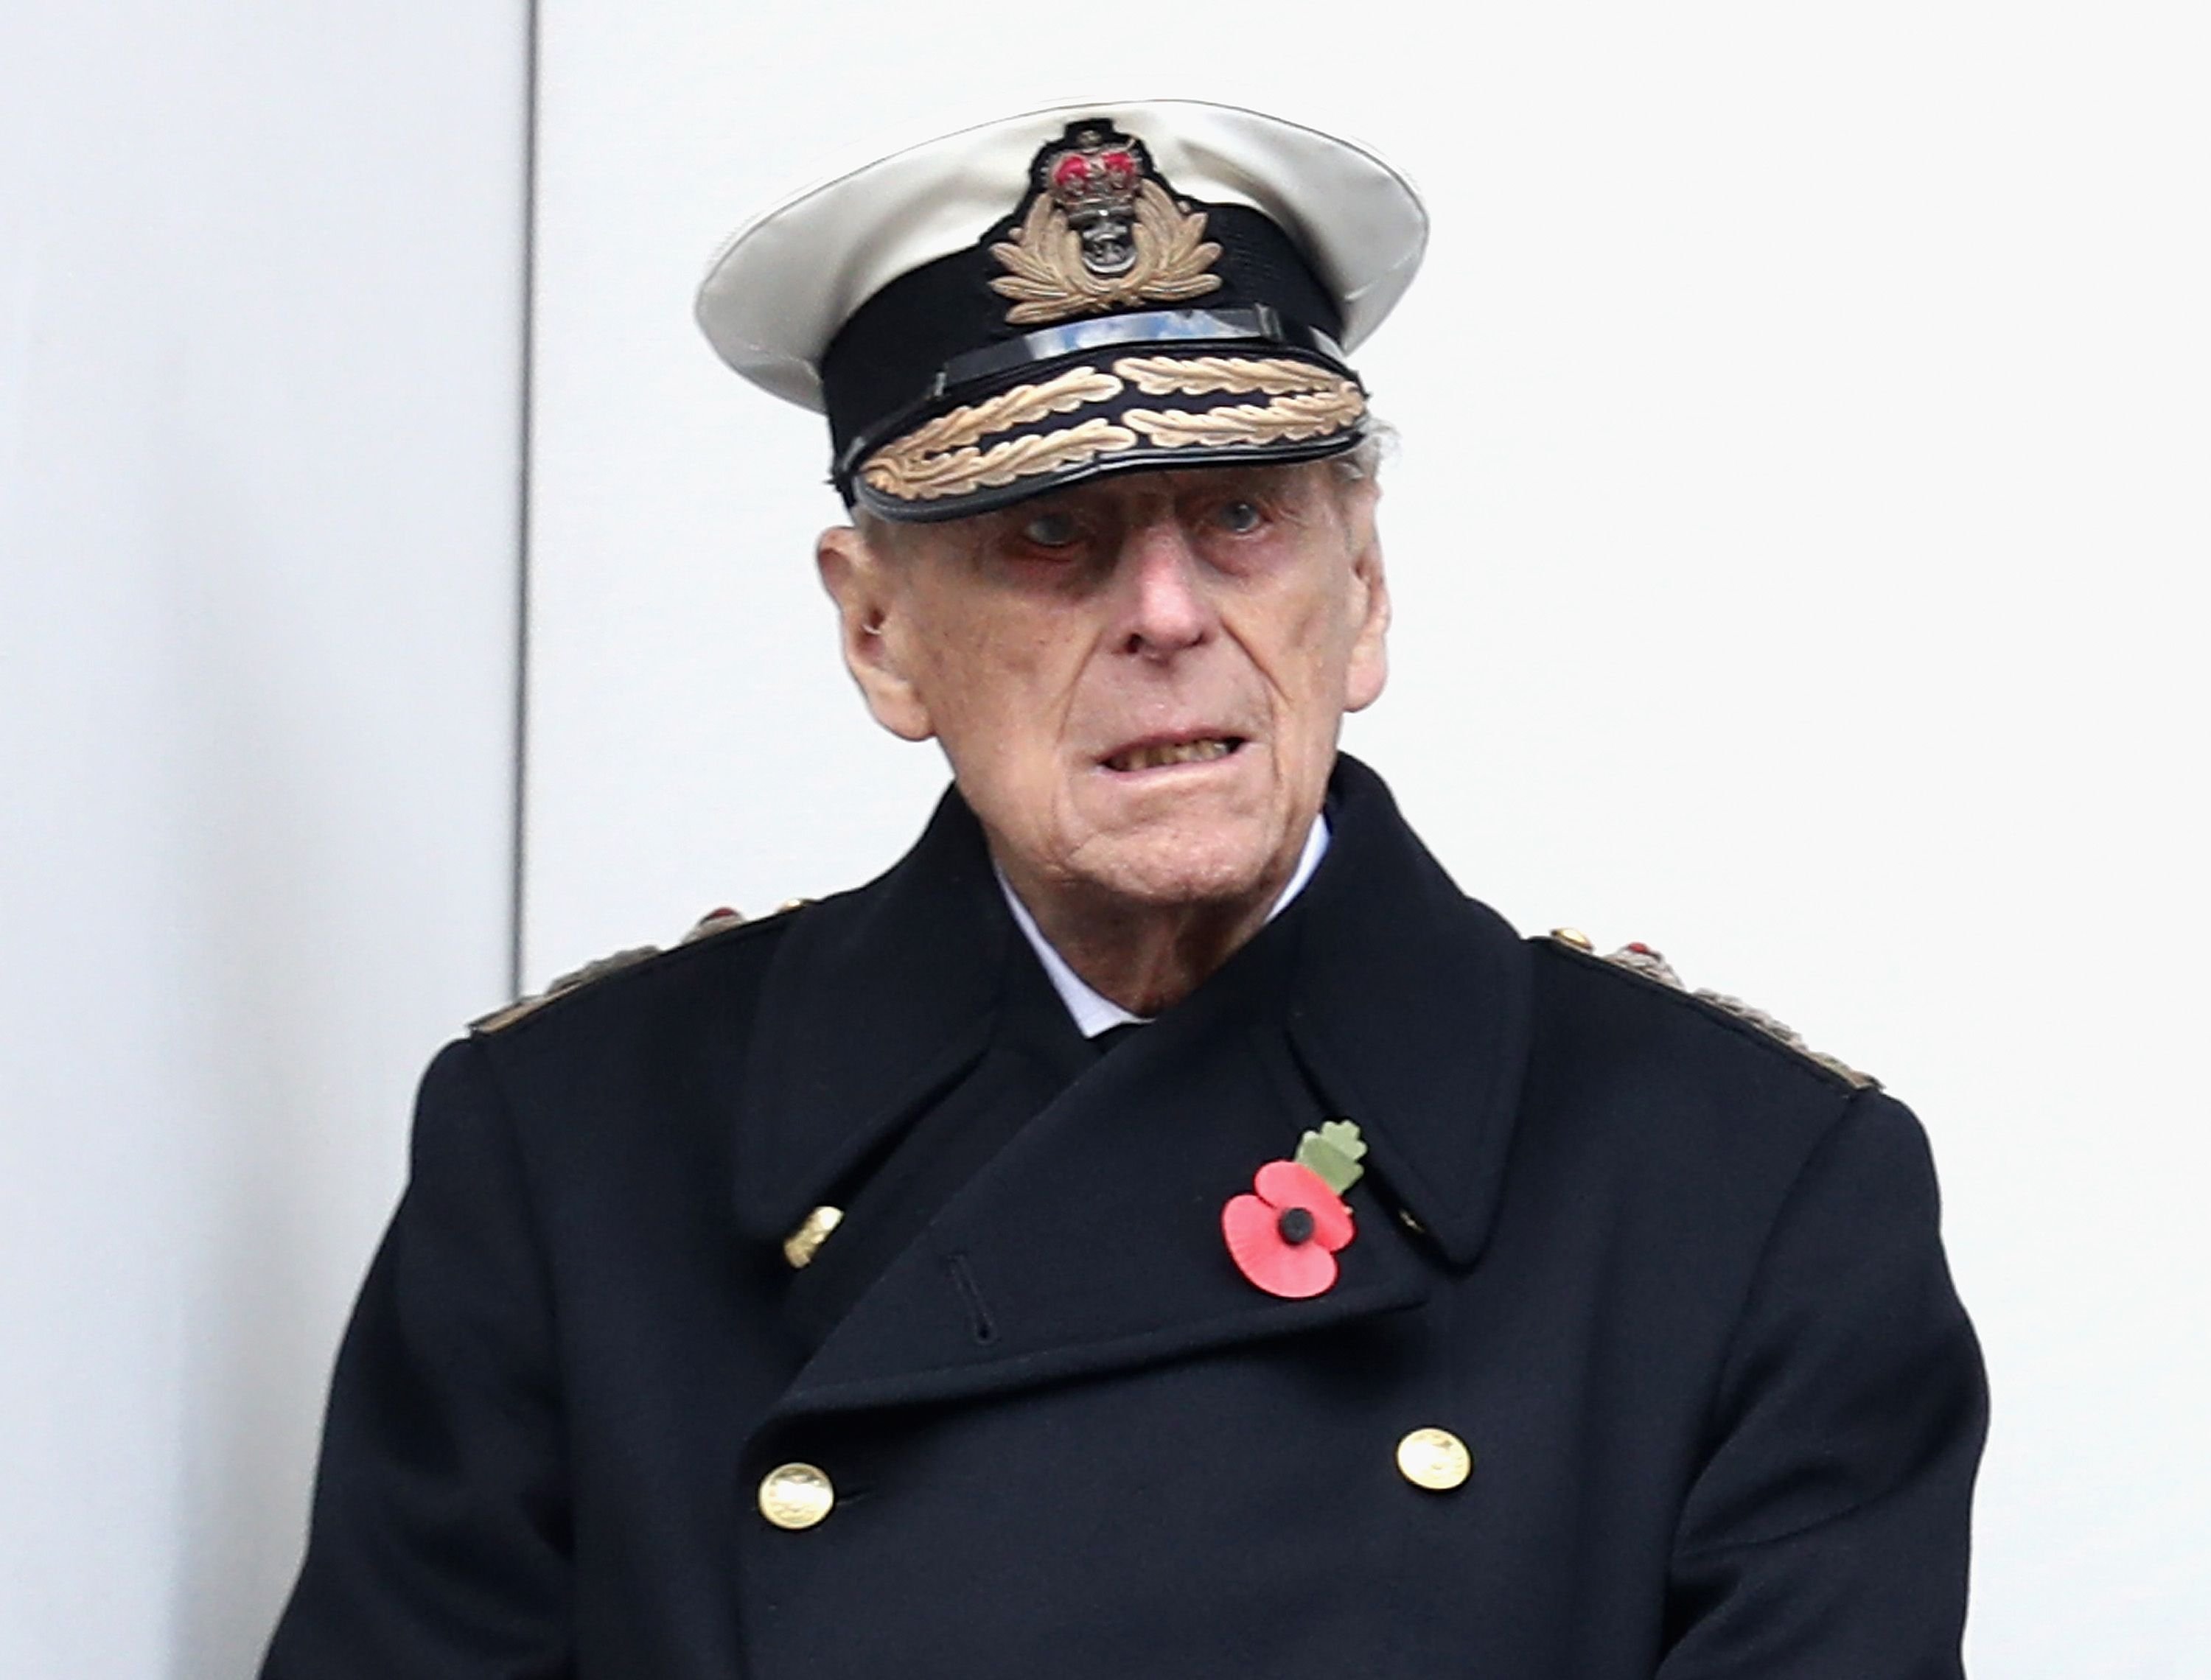 Prince Philip during the annual Remembrance Sunday memorial on November 12, 2017 | Getty Images